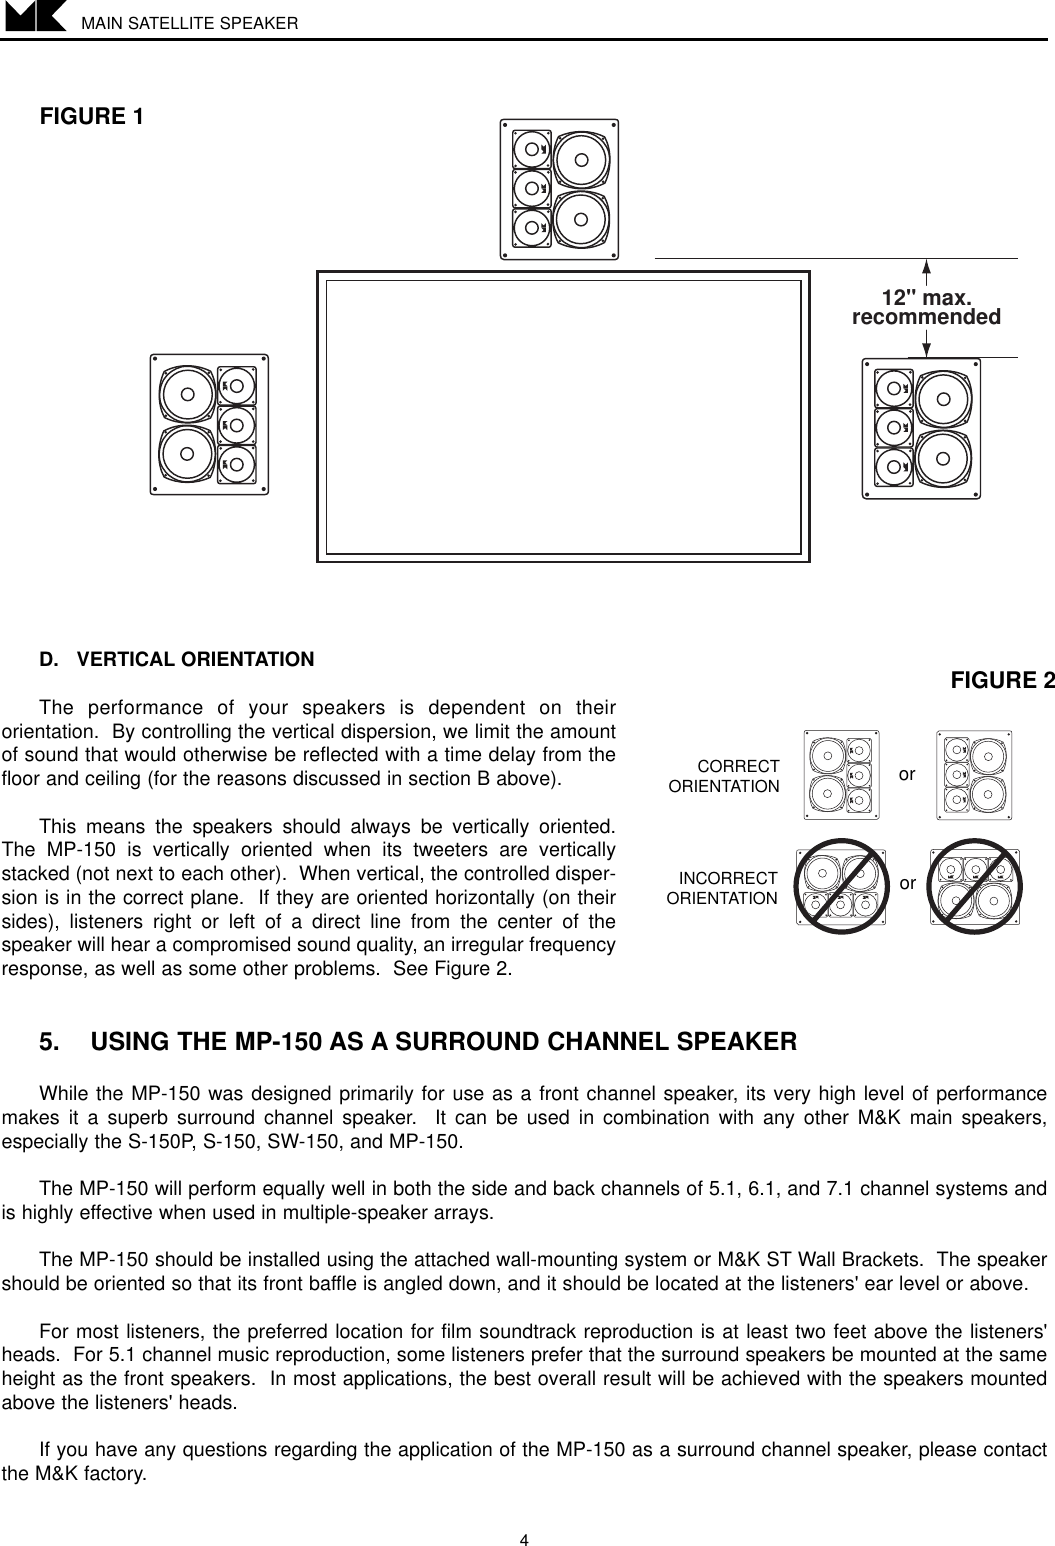 Page 4 of 8 - Mk-Sound Mk-Sound-Mp-150-Users-Manual- MP150/70082 Manual  Mk-sound-mp-150-users-manual